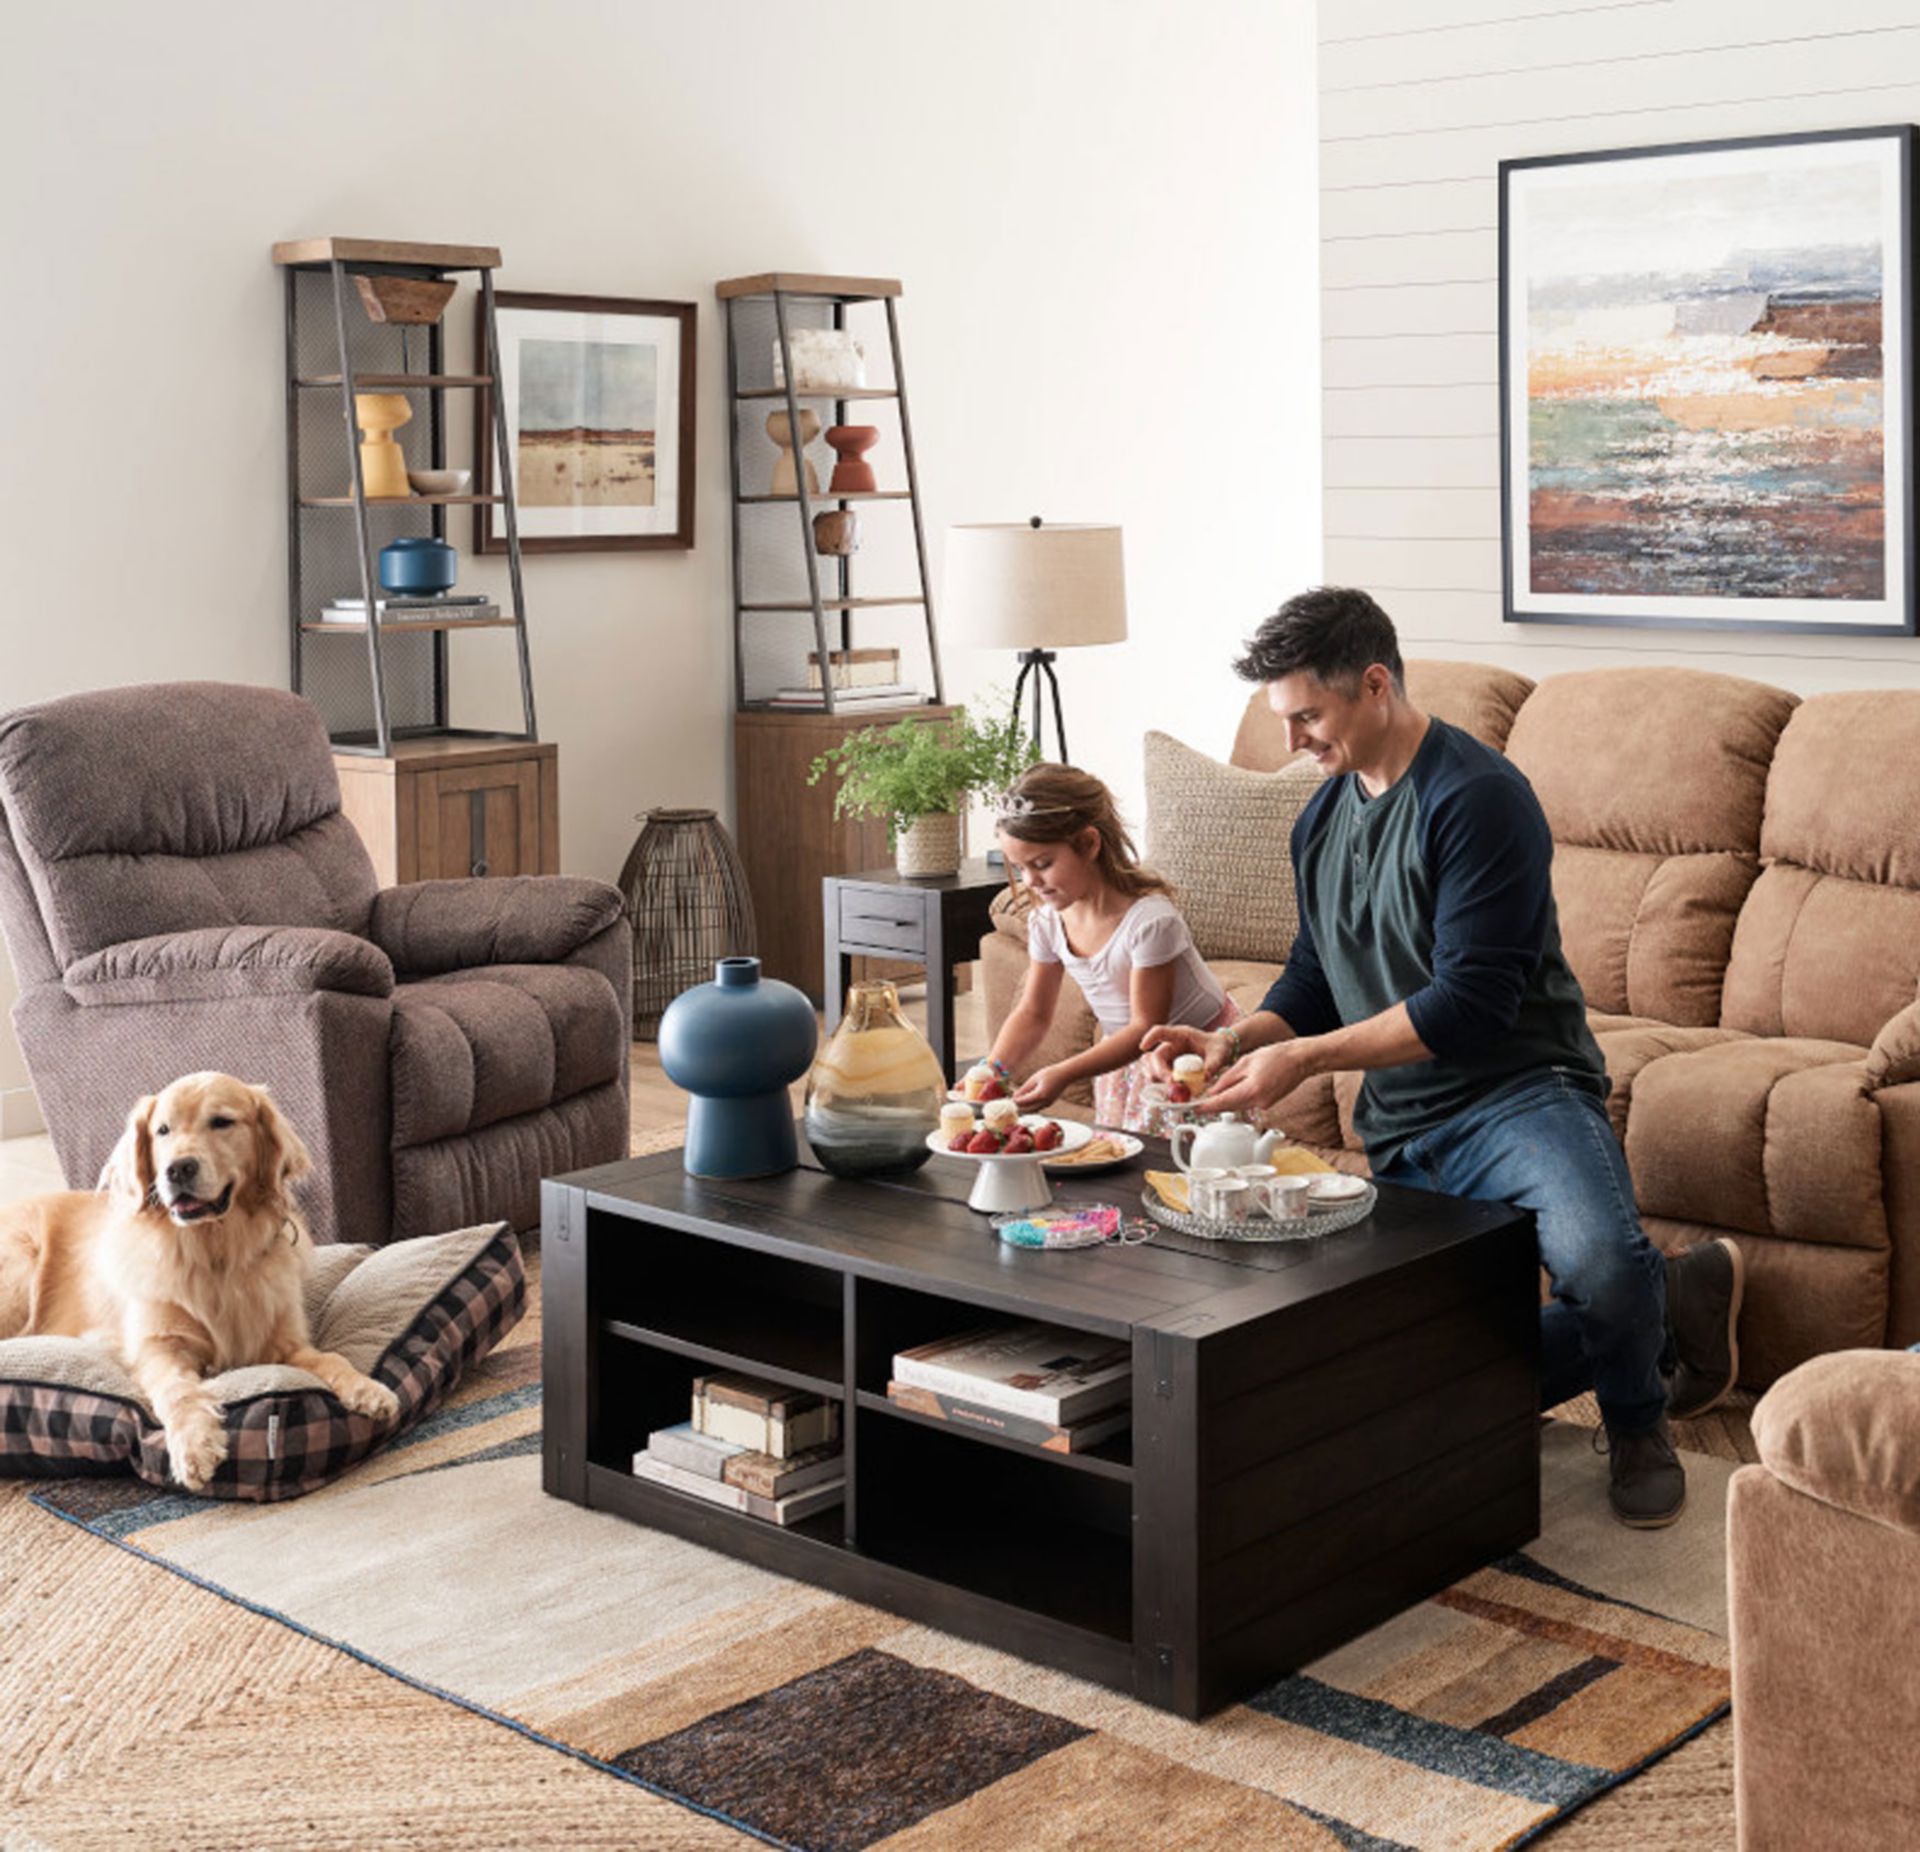 Man and his daughter having a tea part at the coffee table surrounded by morrison lazboy sofa set and golden retriever